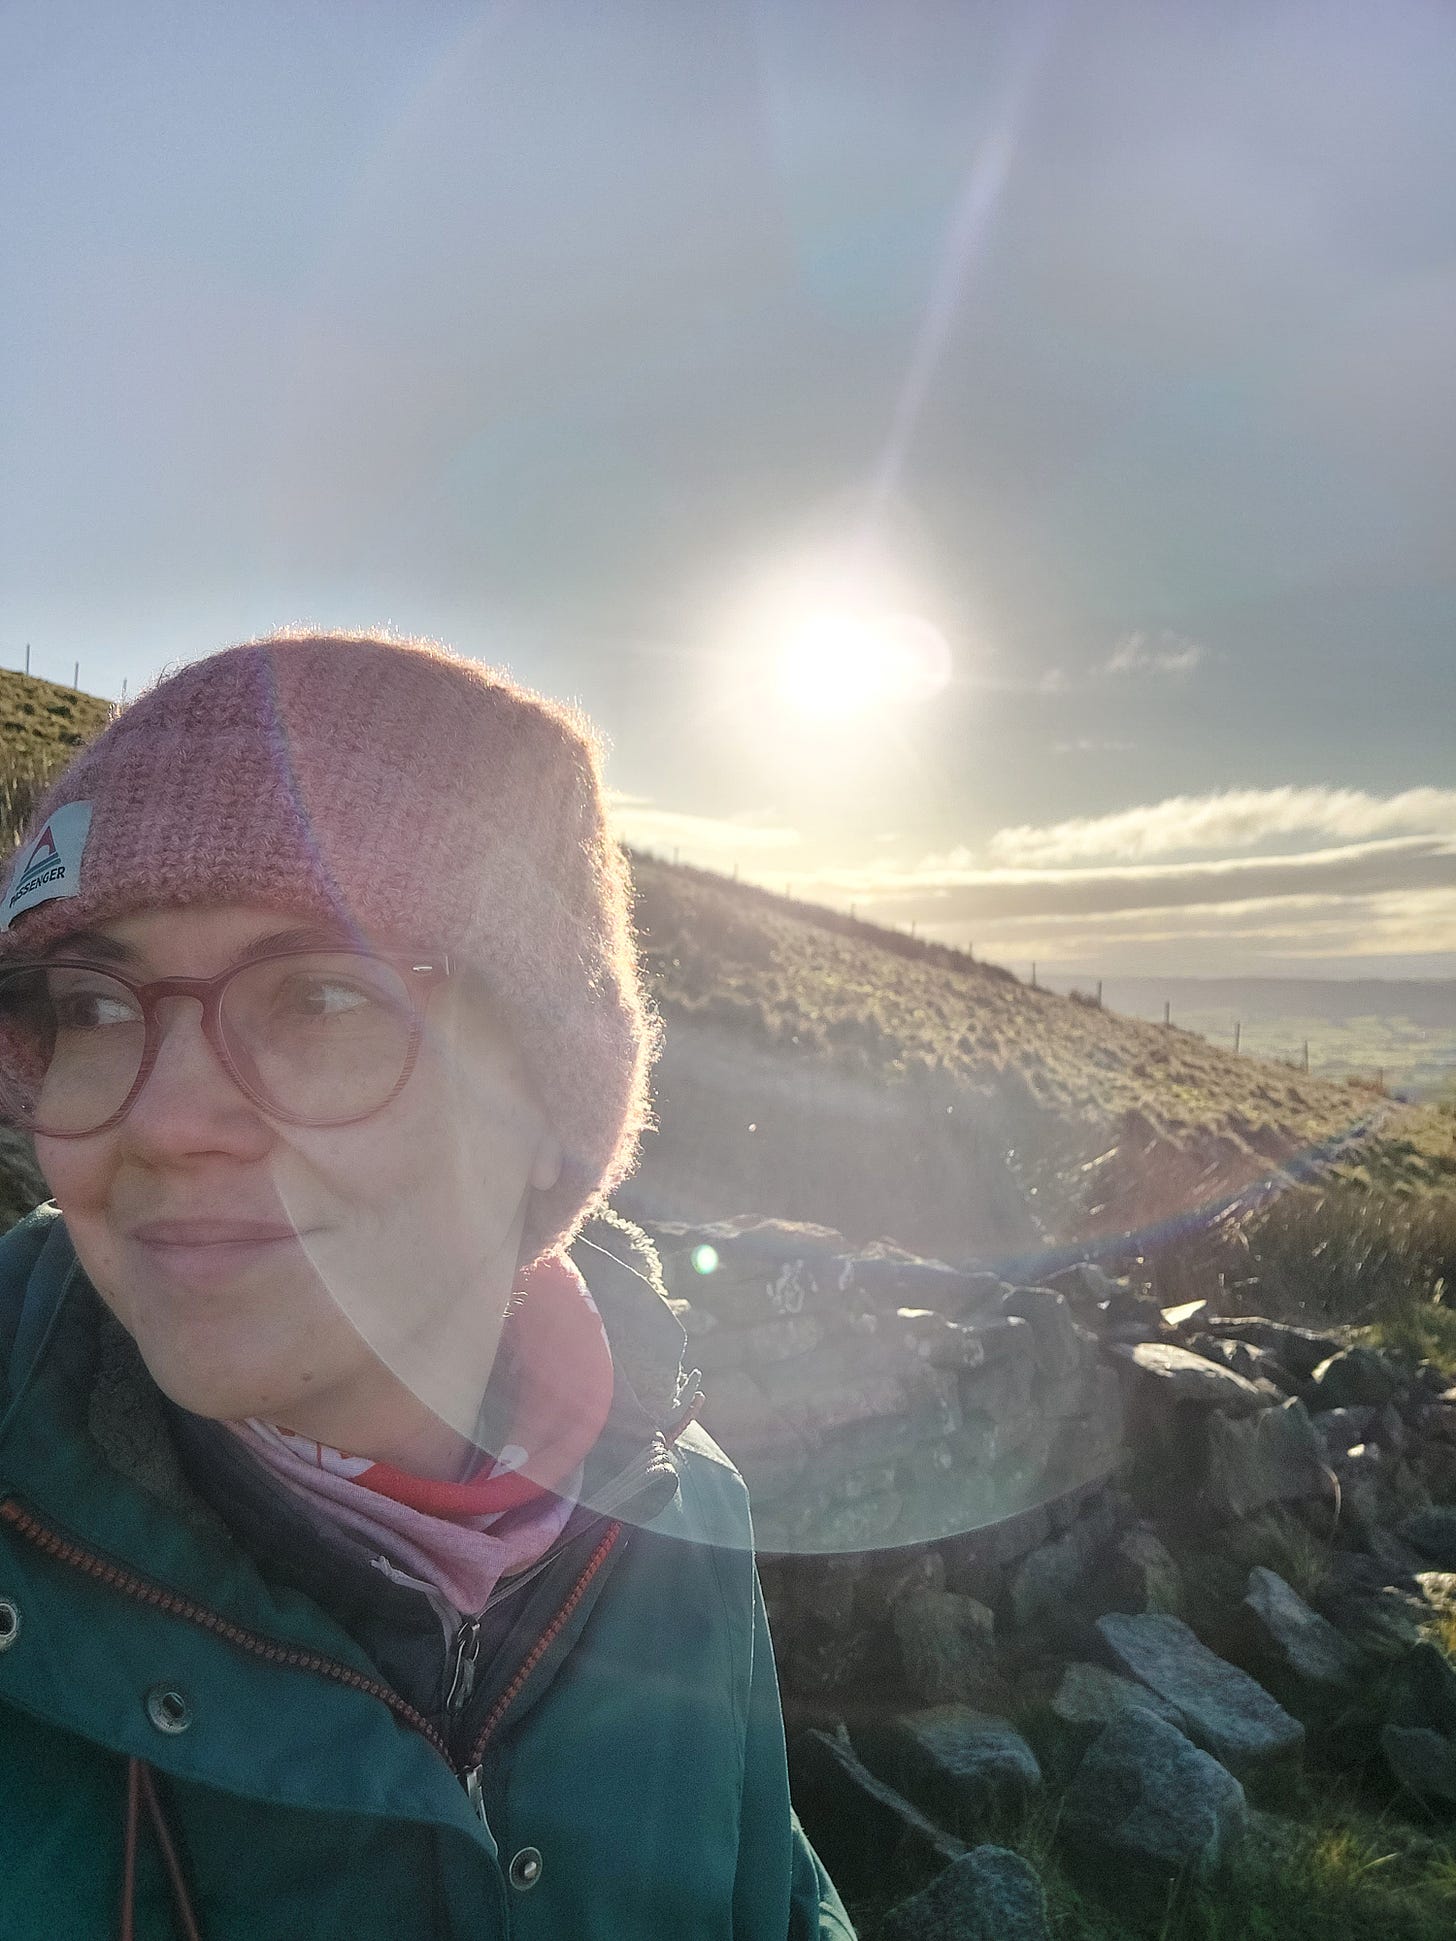 A selfie of me with the dawn sun shining in the background. I've walked high up Parlick hill to take in the view. I'm wearing a pink hat as it was chilly up there